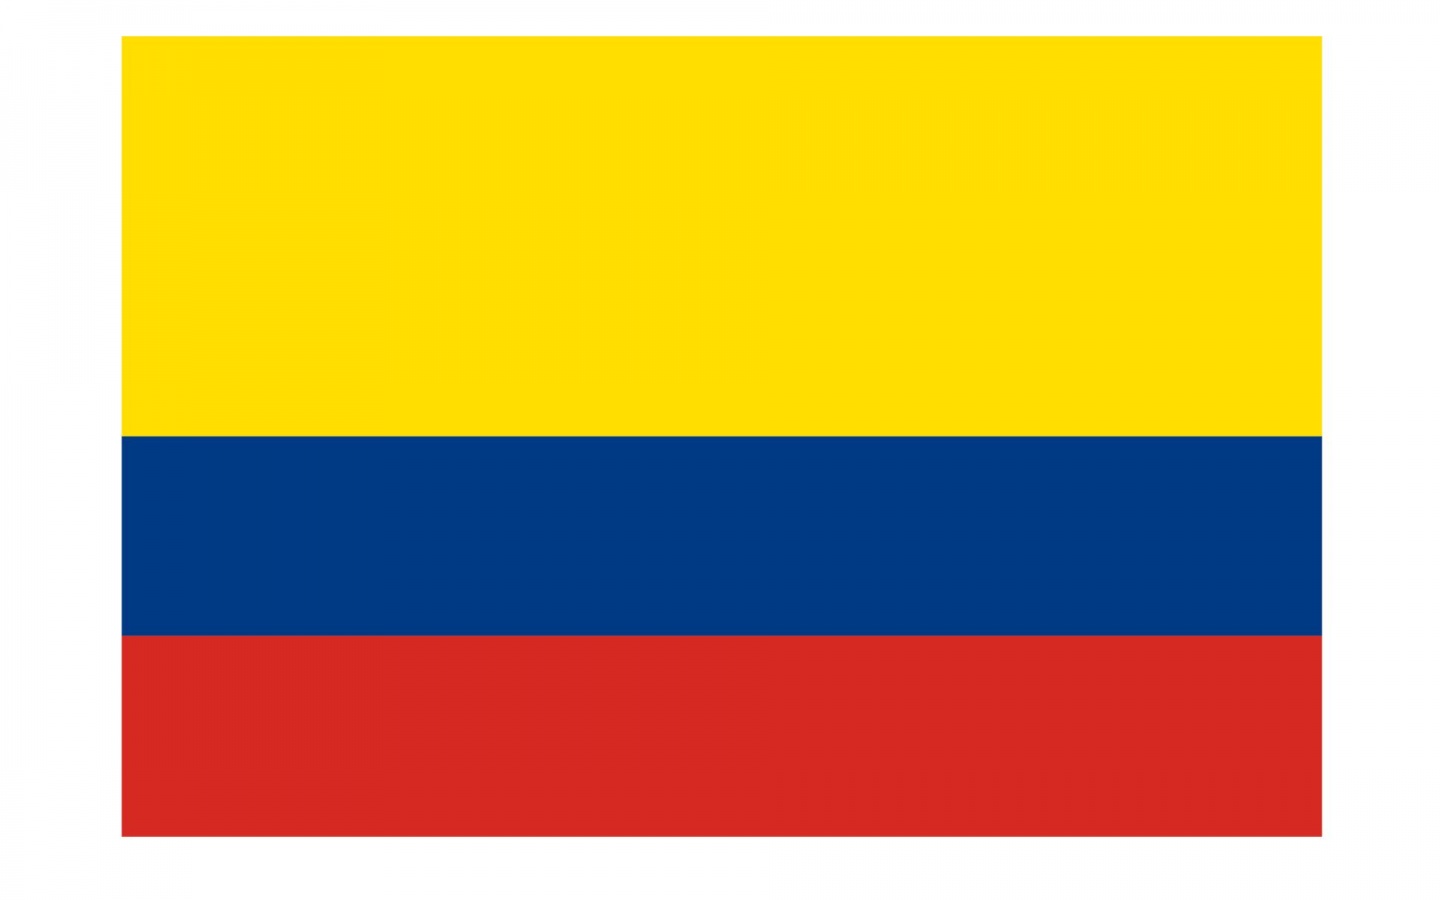 HD Colombia Flag Background Wallpaper